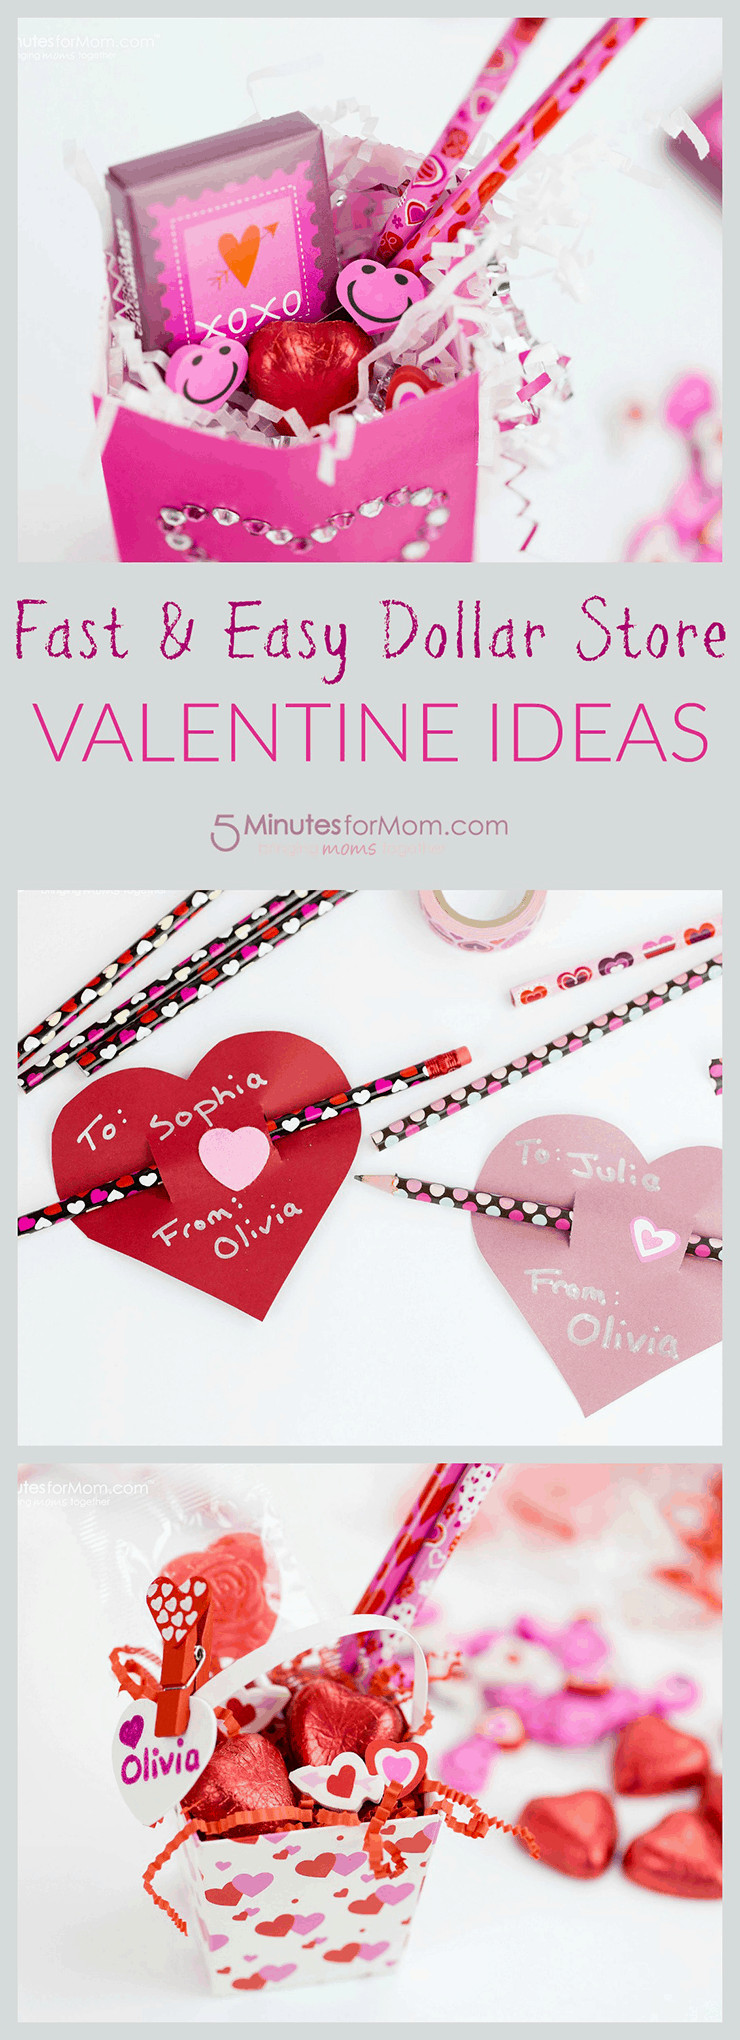 DIY Valentines Gift For Mom
 Fast and Easy Dollar Store Valentine Ideas 5 Minutes for Mom